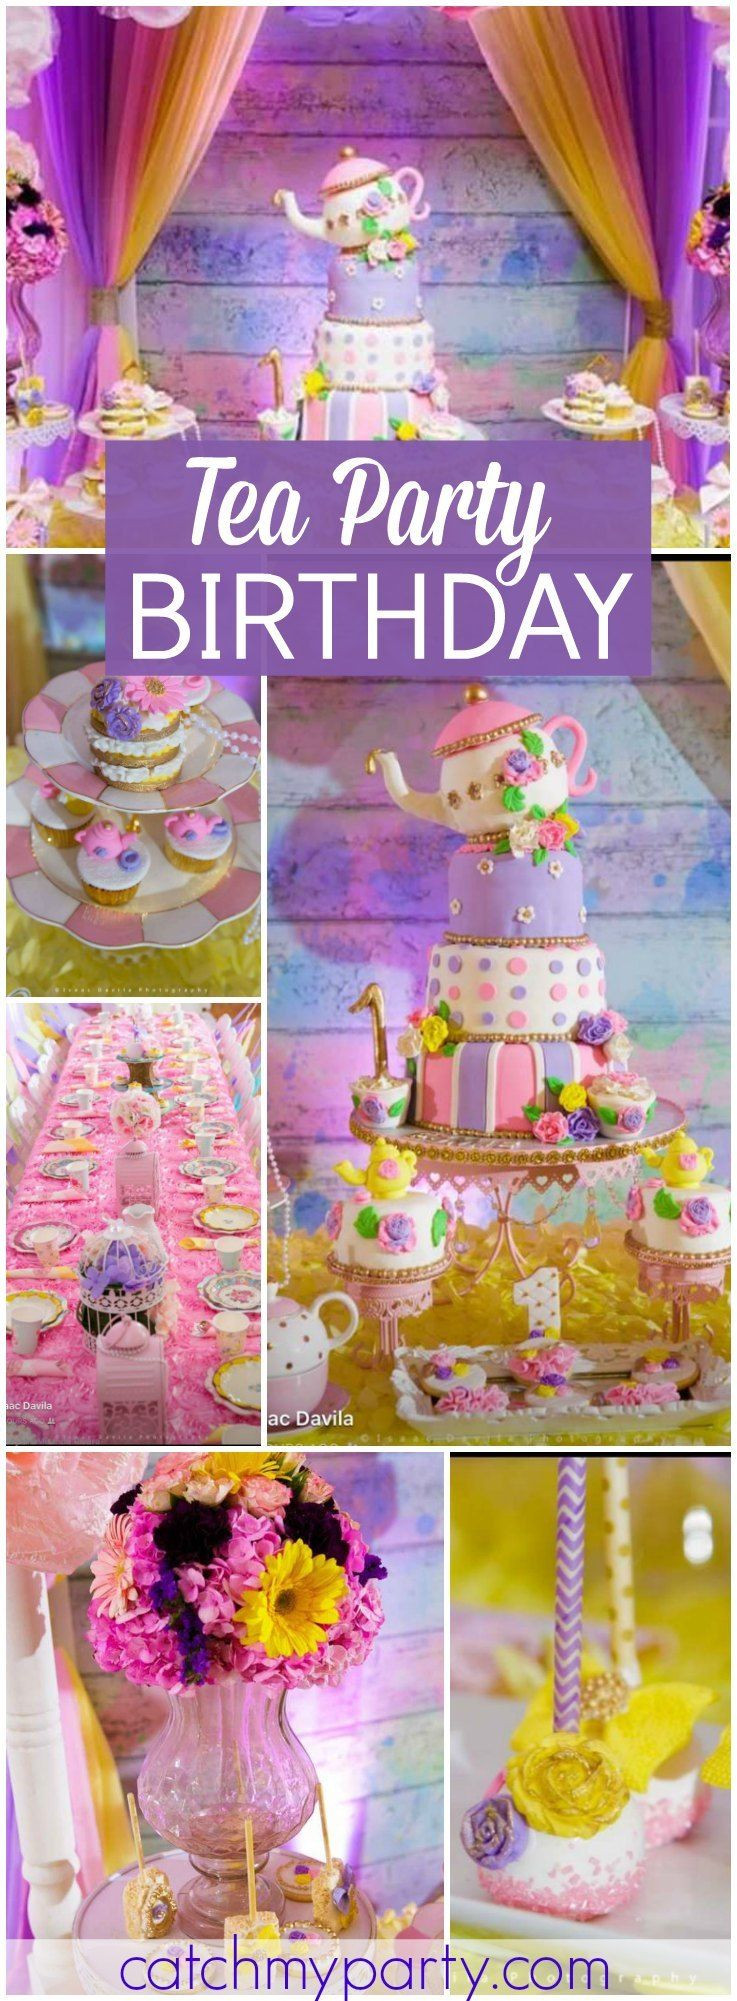 Tea Party Themed Birthday Party Ideas
 What a sweet pastel tea party birthday party See more party ideas at CatchMyParty